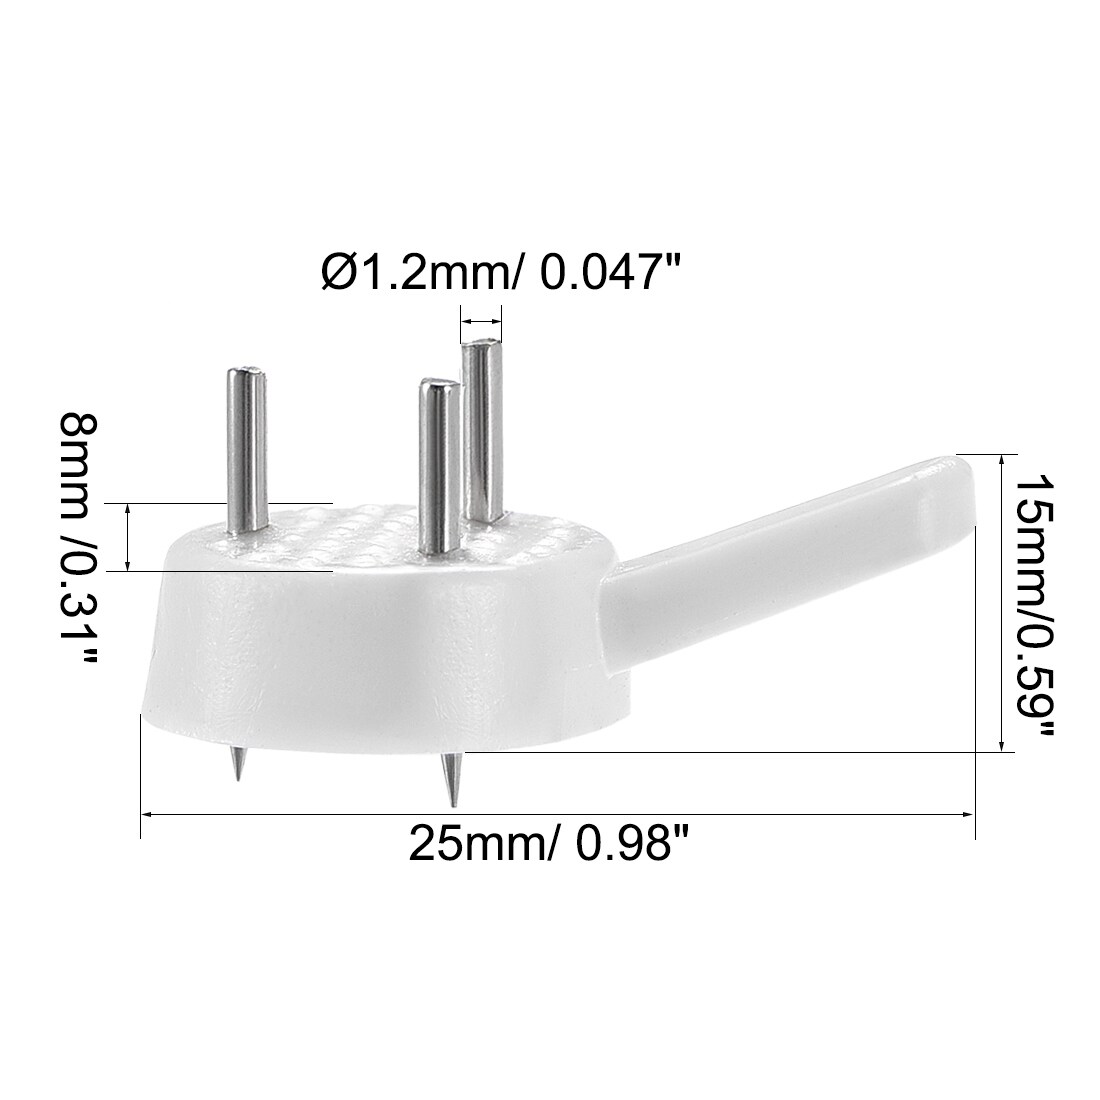 6lbs Hardwall Hanger Wall Mount Non-mark Hook Picture Hangers, 20 Pcs -  White - #1 25mm x 15mm,20 Pcs - On Sale - Bed Bath & Beyond - 35441122